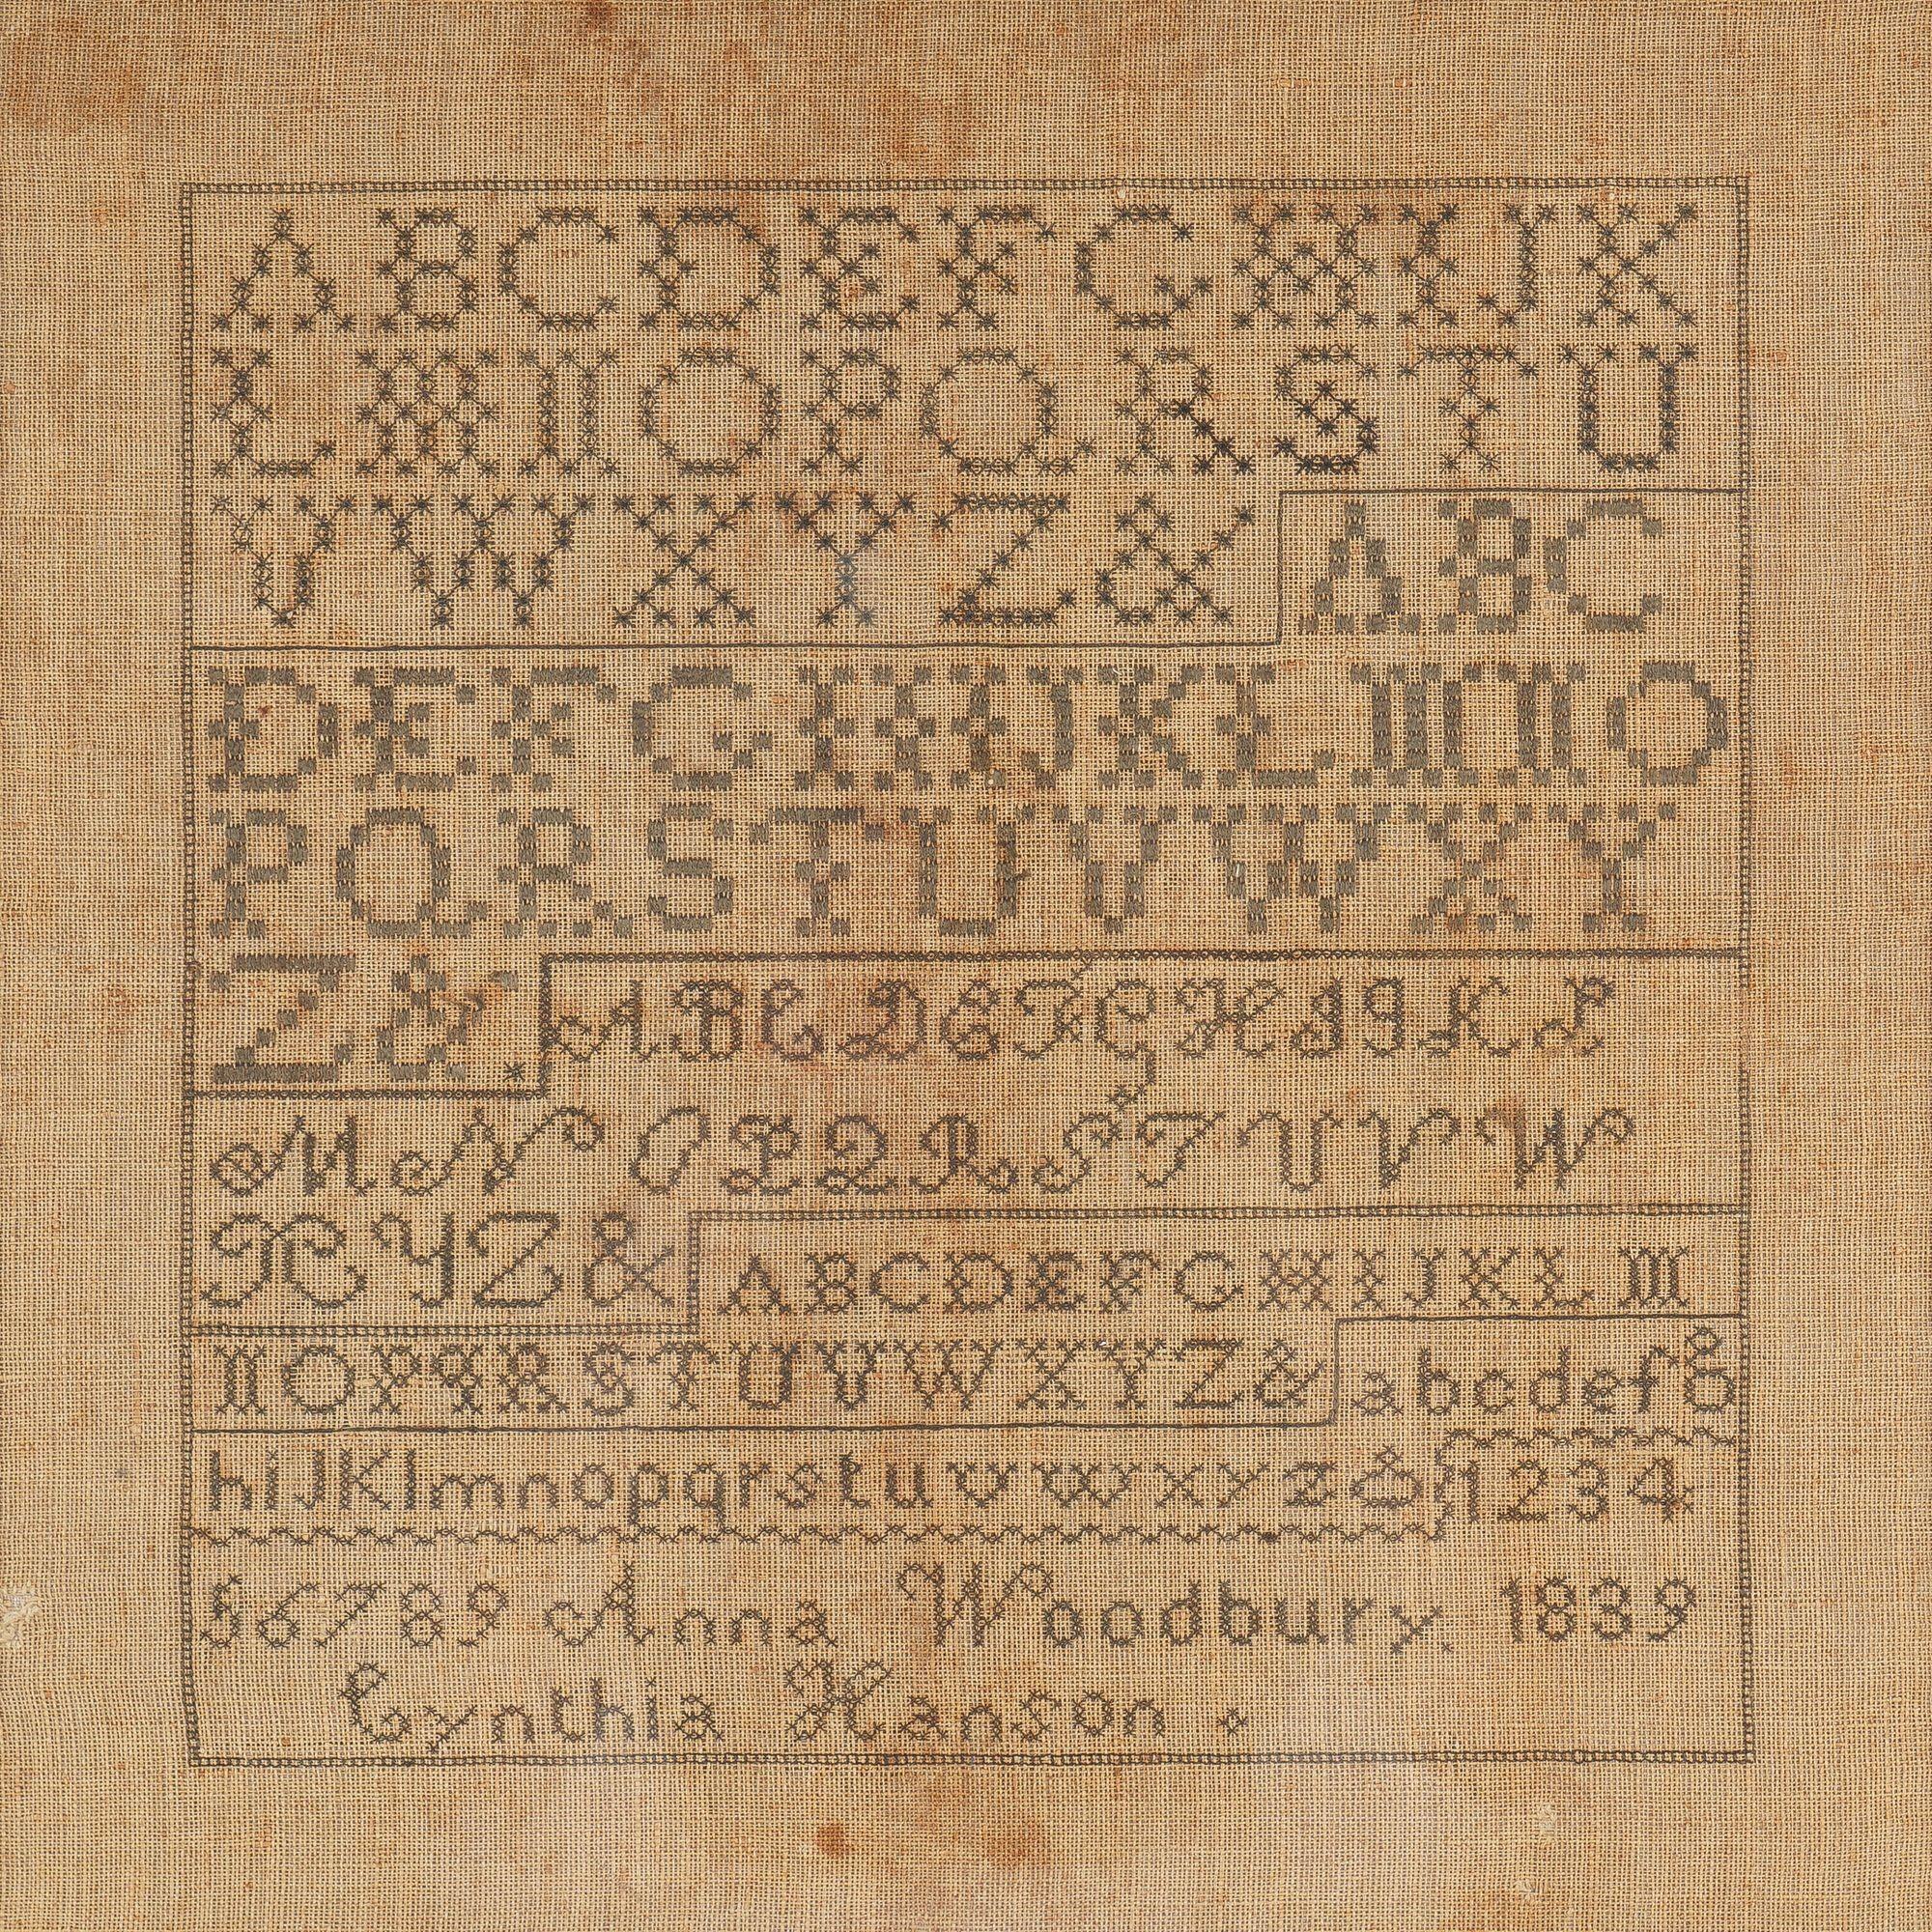 American marking sampler, featuring five sample alphabets and a numerical progression in contrasting styles and stitch. The sampler was stitched by Anna Woodbury, born 1839, and assisted by instructor Cynthia Hanson, born Cumberland, Maine in 1804.